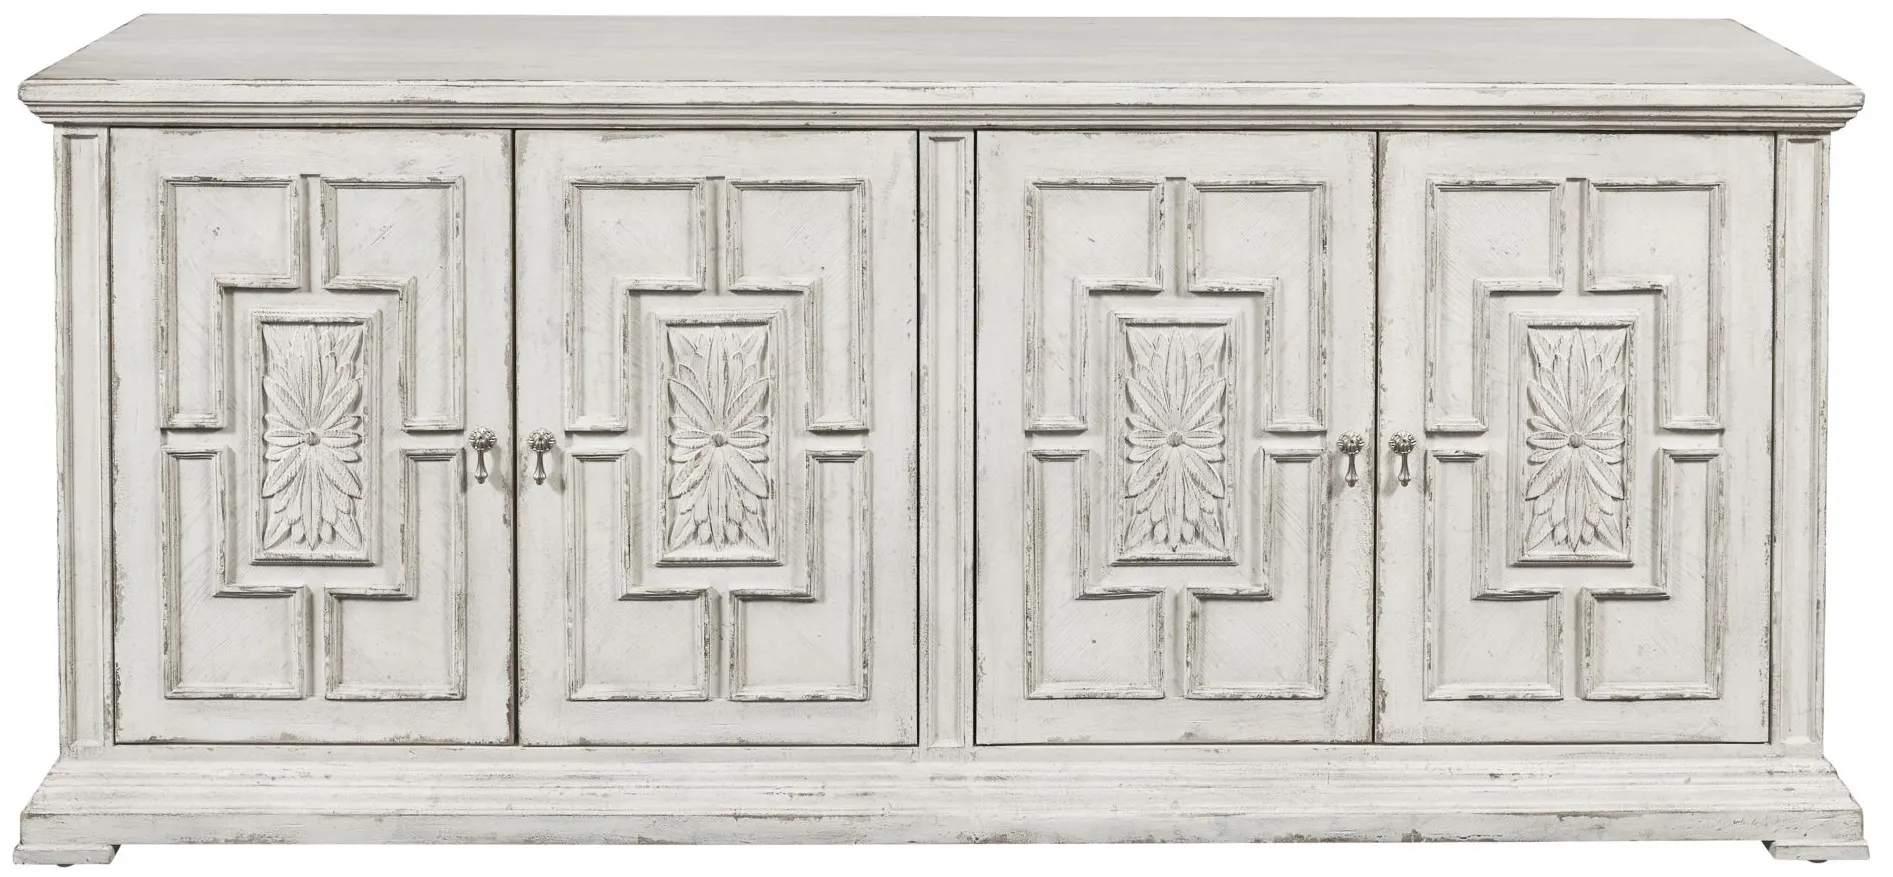 Pulaski Accents Entertainment Credenza in White by Samuel Lawrence